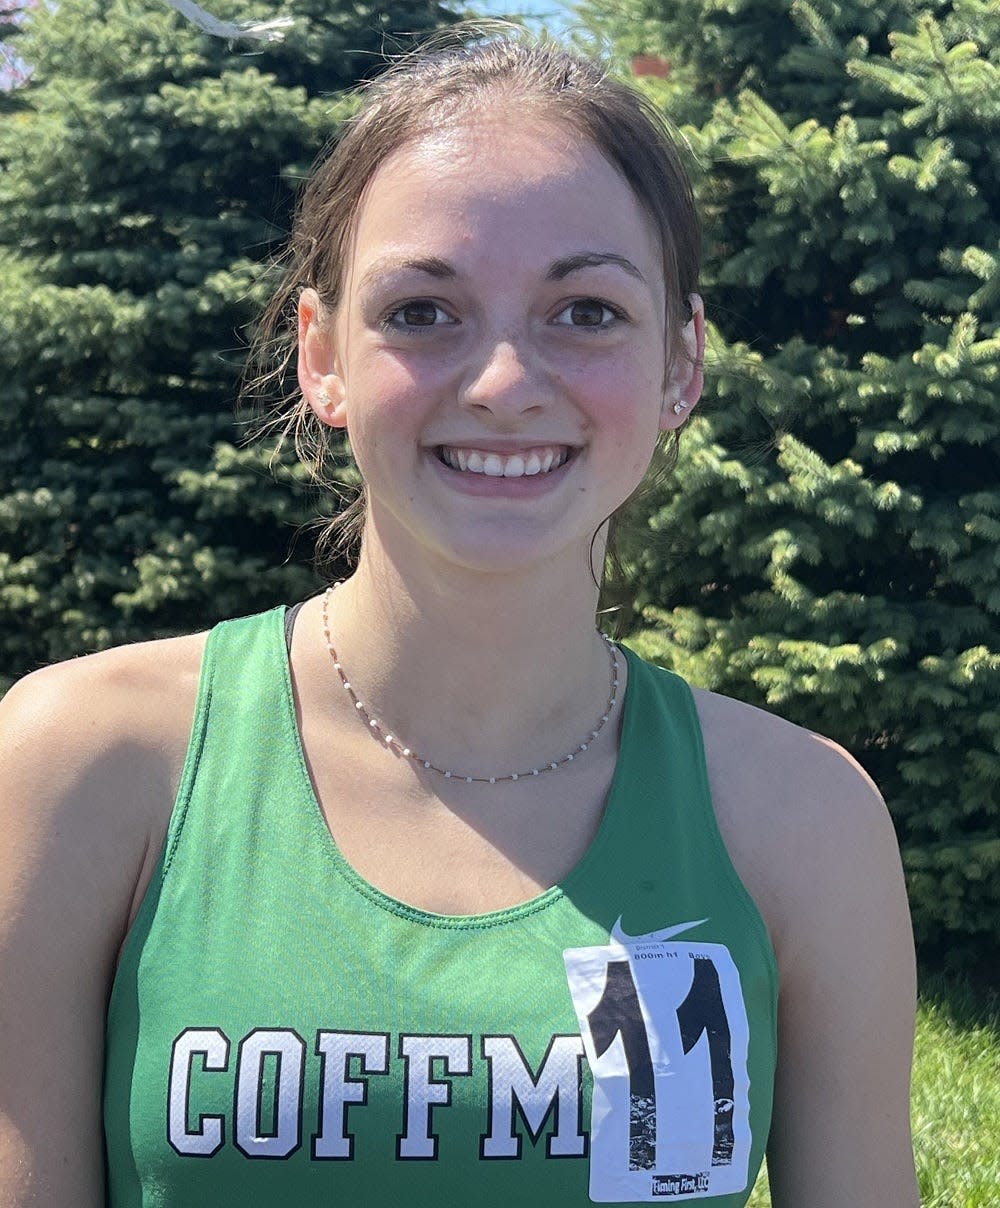 Dublin Coffman's Kylie Feeney broke Abby Steiner's program record in the 400 meters on Friday.